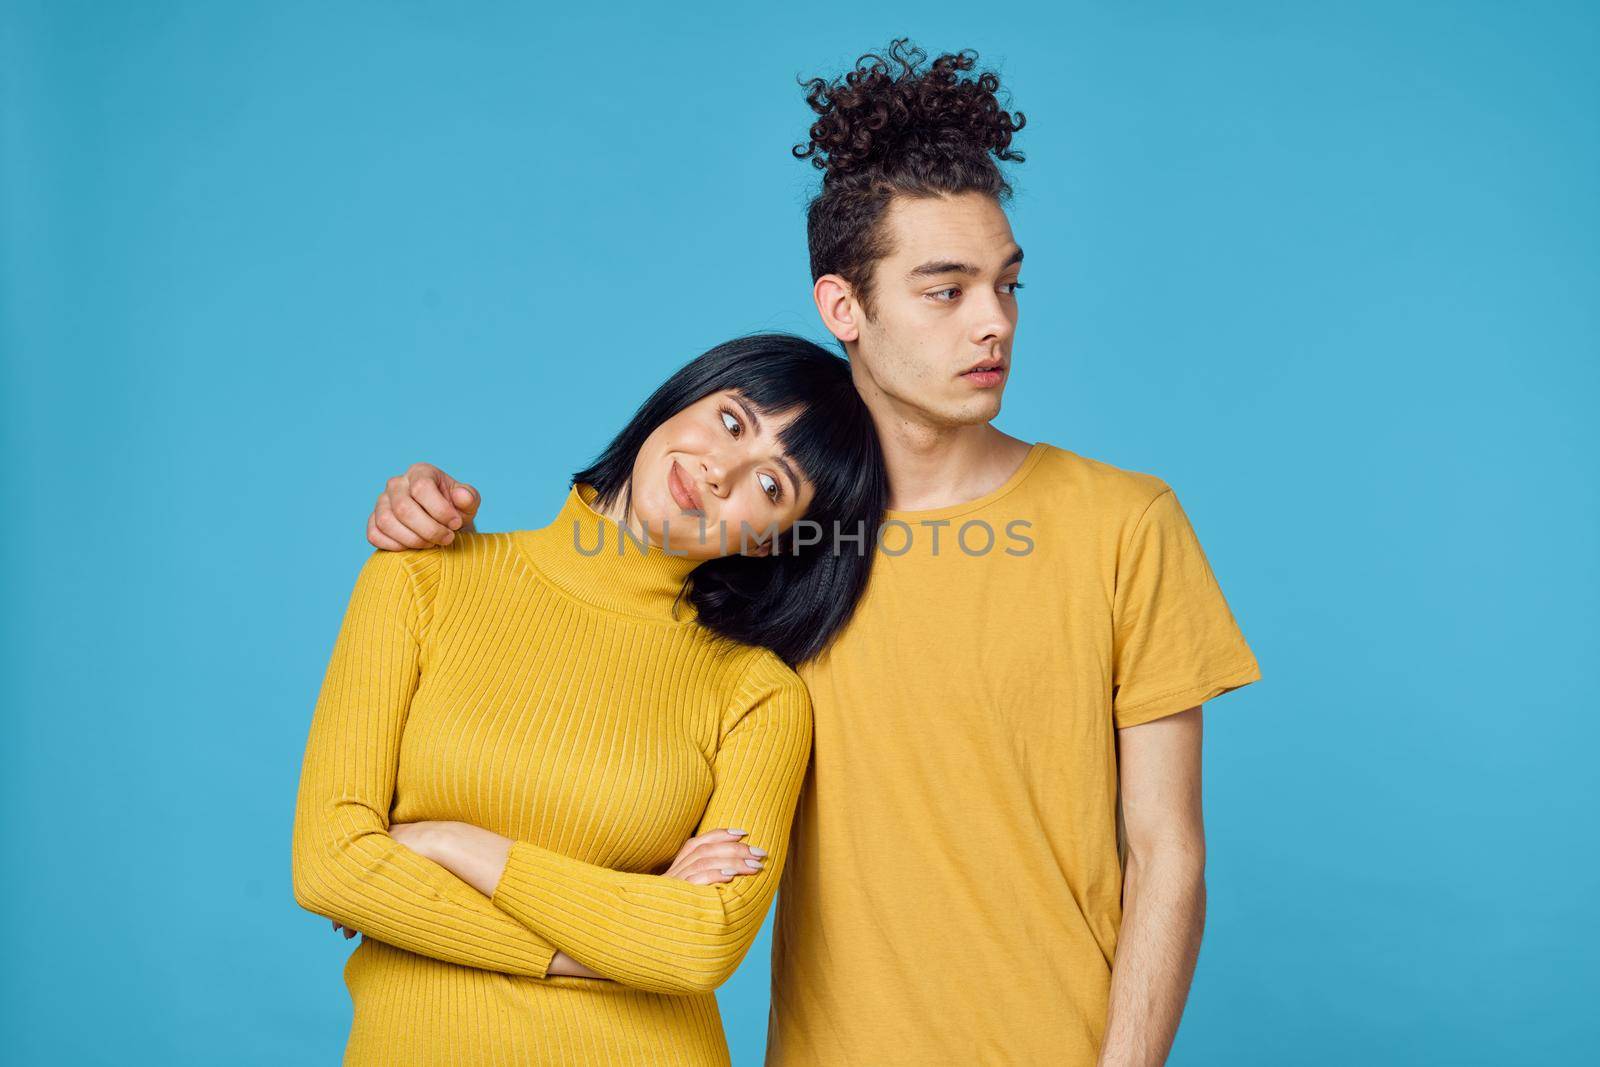 kinky guy and girl together friendship fun blue background. High quality photo